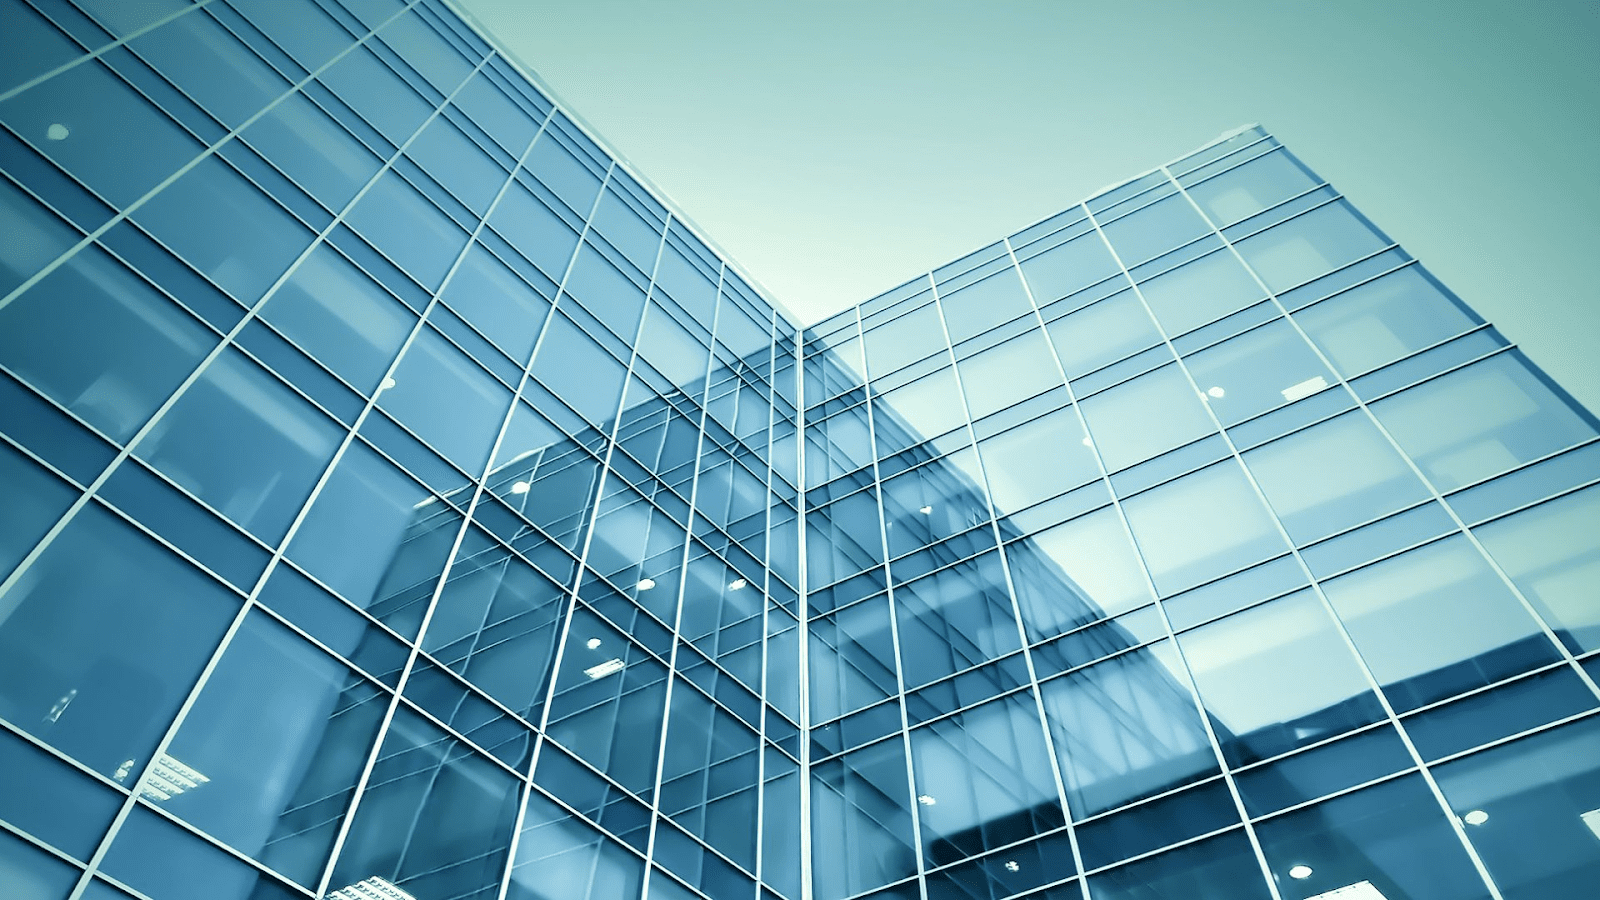 This image depicts the exterior facade of a modern building, characterized by its reflective glass panels that form a seamless curtain wall. The glass is tinted in a calming blue hue, which may indicate a design choice for aesthetic appeal or solar control. The structure's geometric precision, with its clean lines and right angles, suggests a contemporary architectural style, often associated with corporate or commercial buildings. The sky, barely visible as a reflection on the building's surface, is likely clear, hinting at the photo being taken on a bright day. This building could easily be part of a bustling business district, possibly housing offices such as law firms, financial institutions, or corporate headquarters.